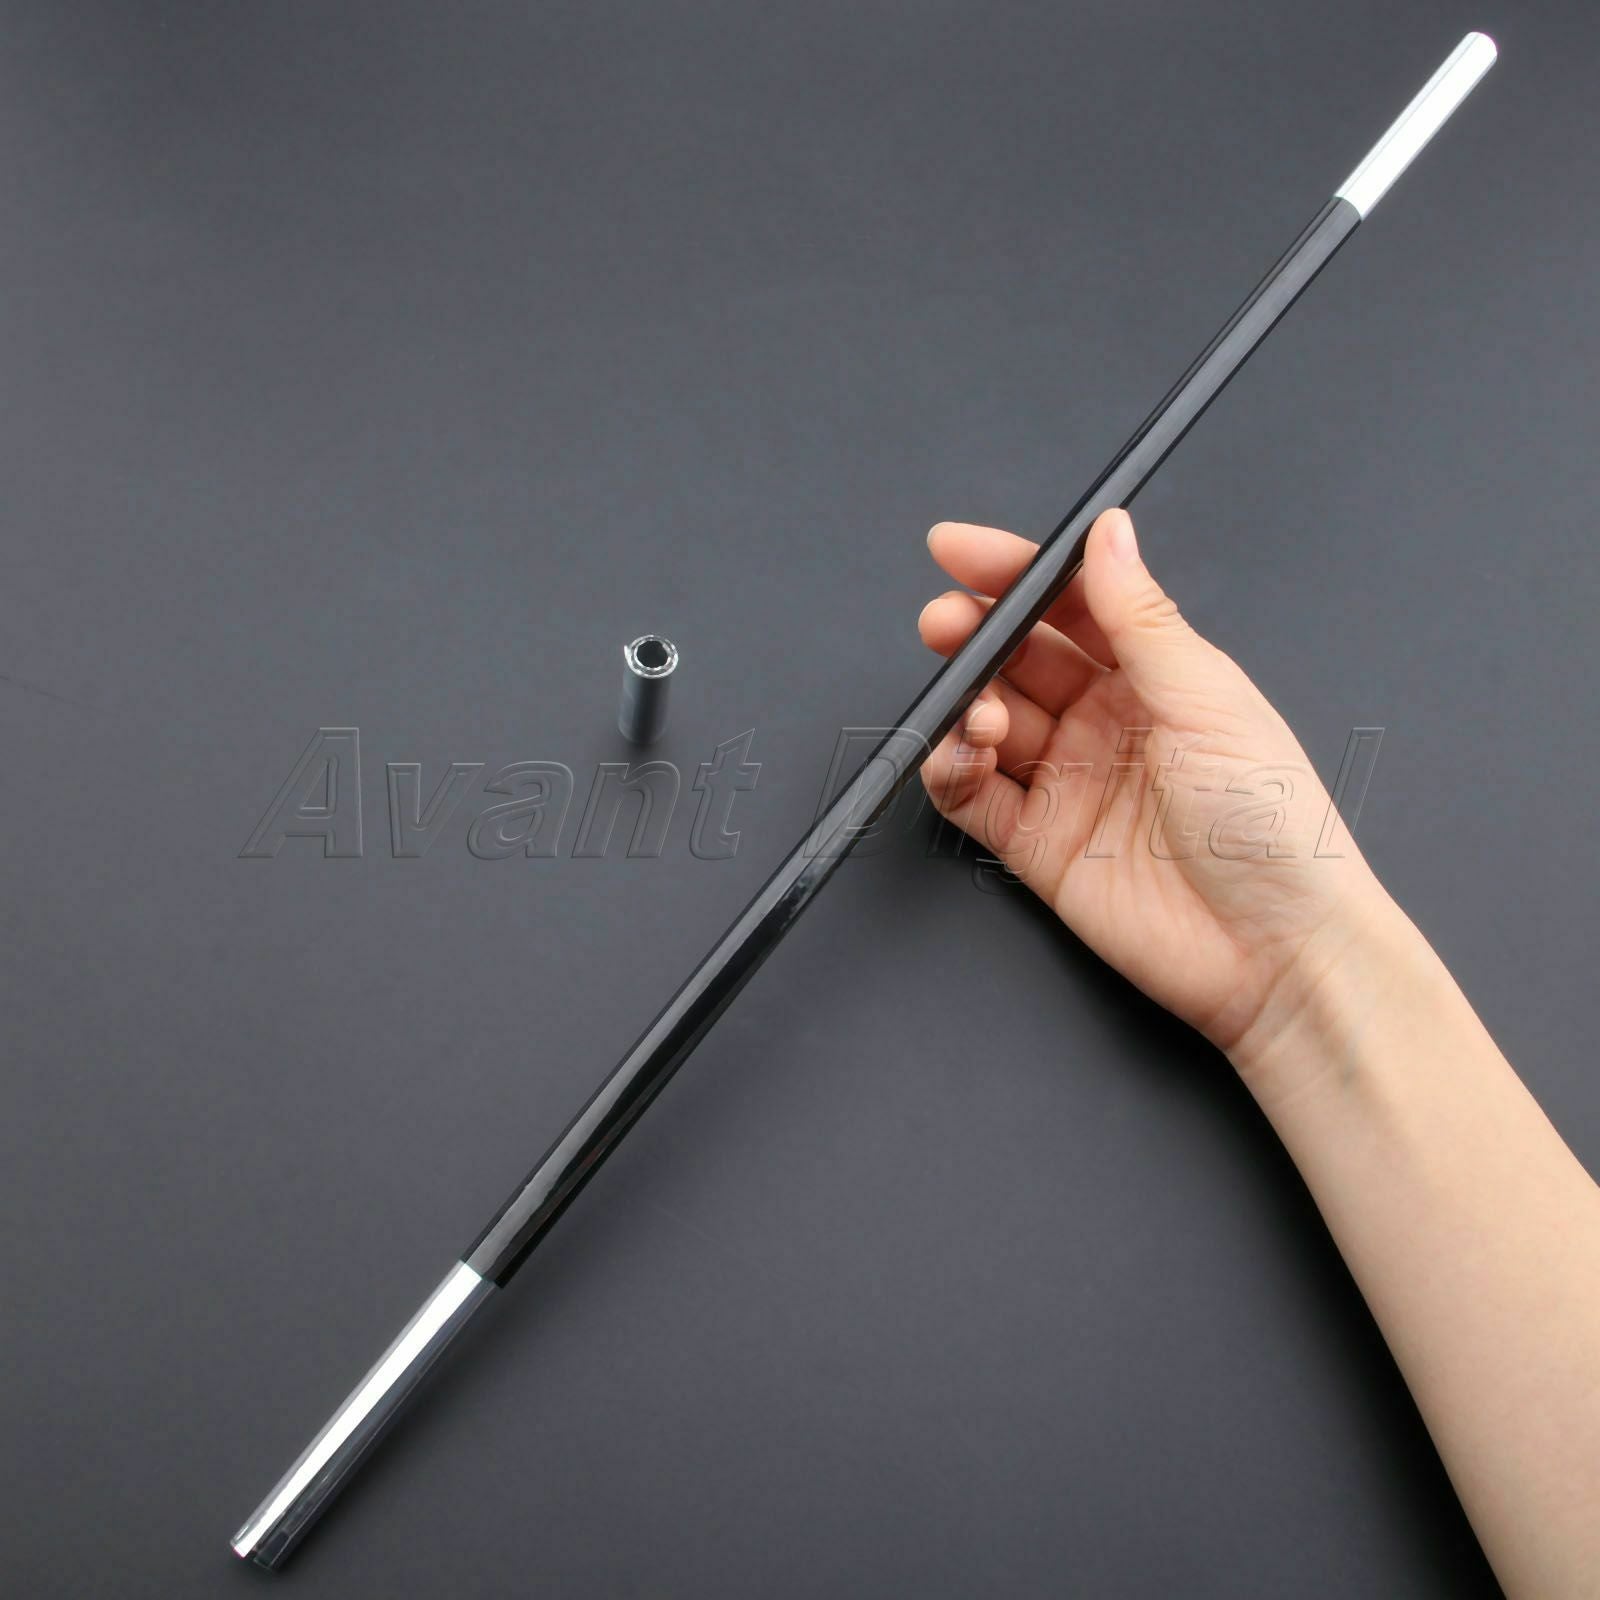 Novelty Suddenly Rising Jumping Magic Appearing Wand Prop Stage Trick Plastic